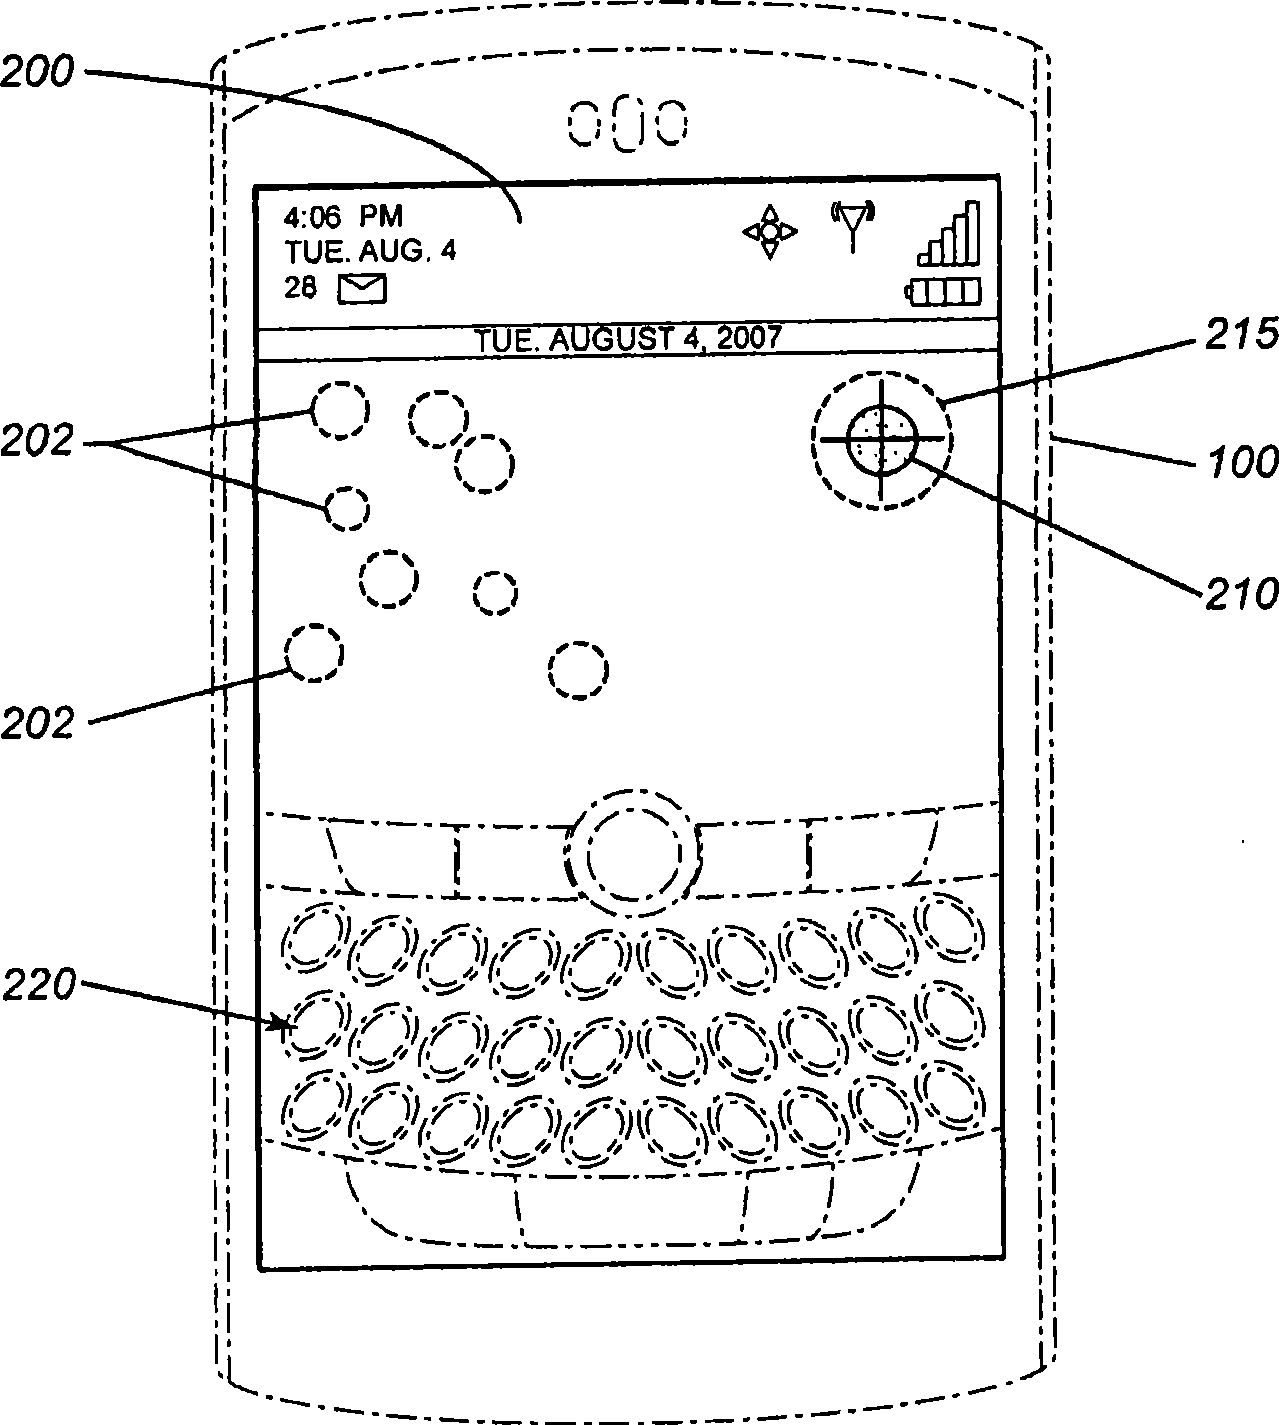 User interface for touchscreen device